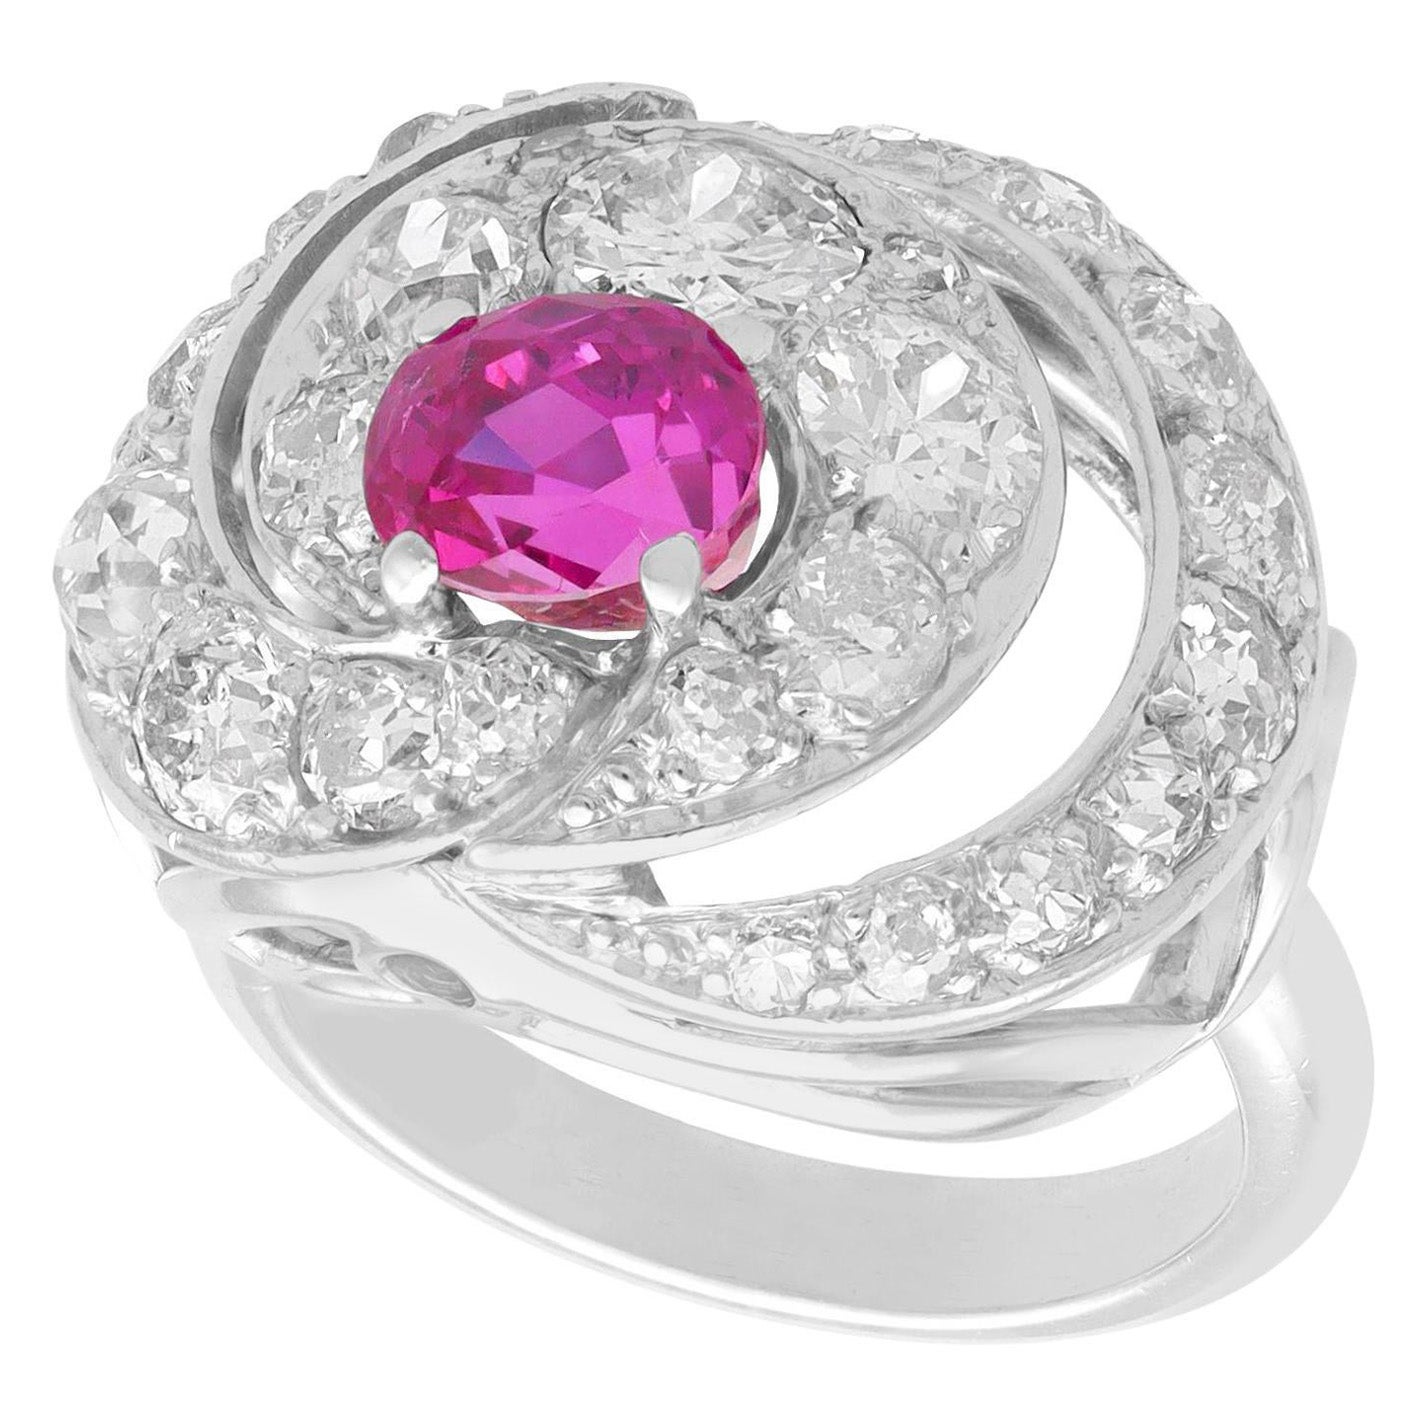 1.22 Carat Pink Sapphire and 2.73 Carat Diamond Ring For Sale